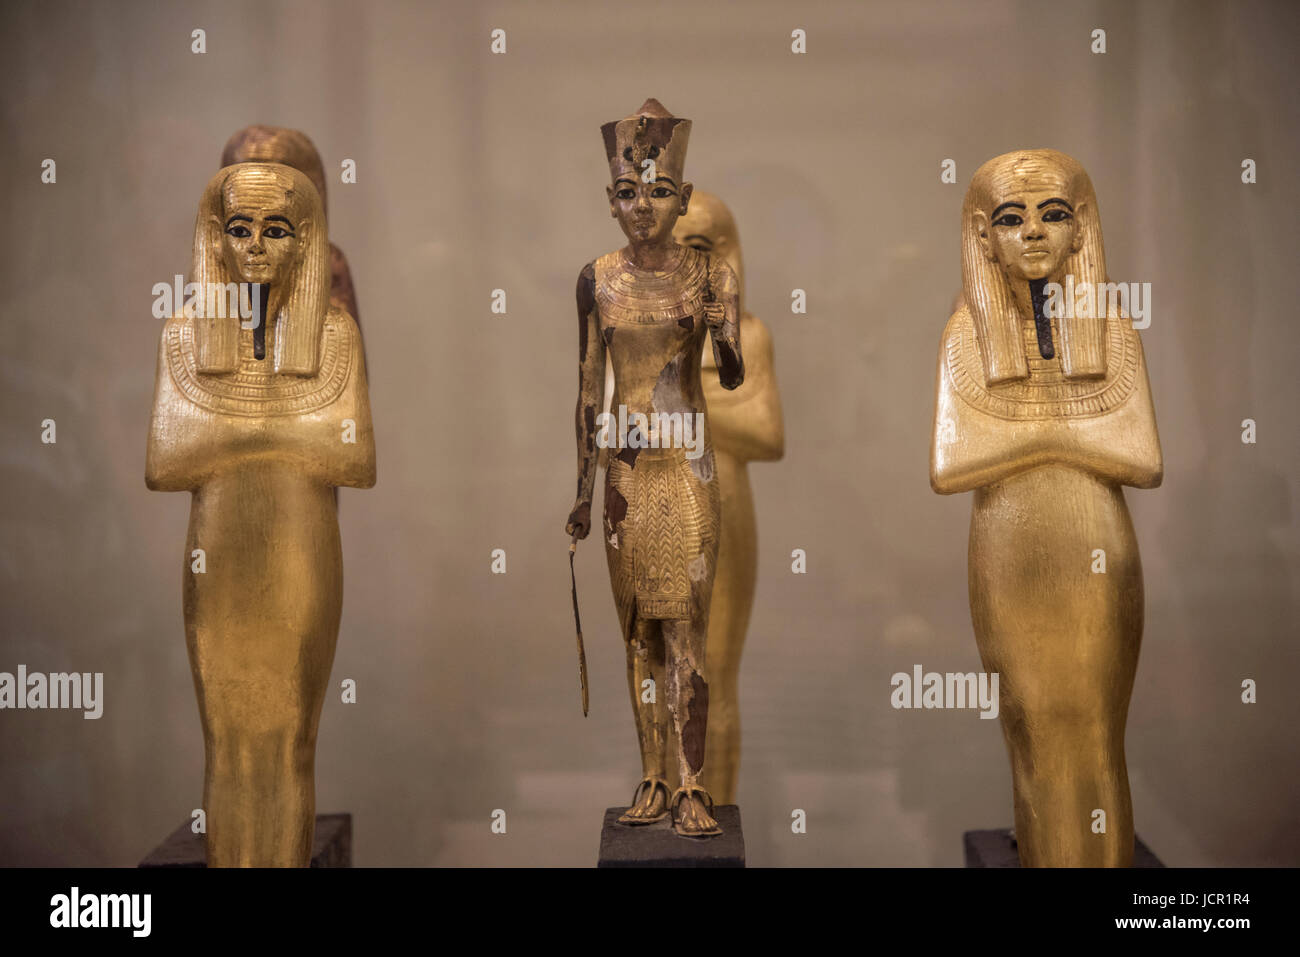 Golden idols of Egyptian Kings, Displayed at the Museum of Egyptian Antiquities, known commonly as the Egyptian Museum or Museum of Cairo, is home to  Stock Photo